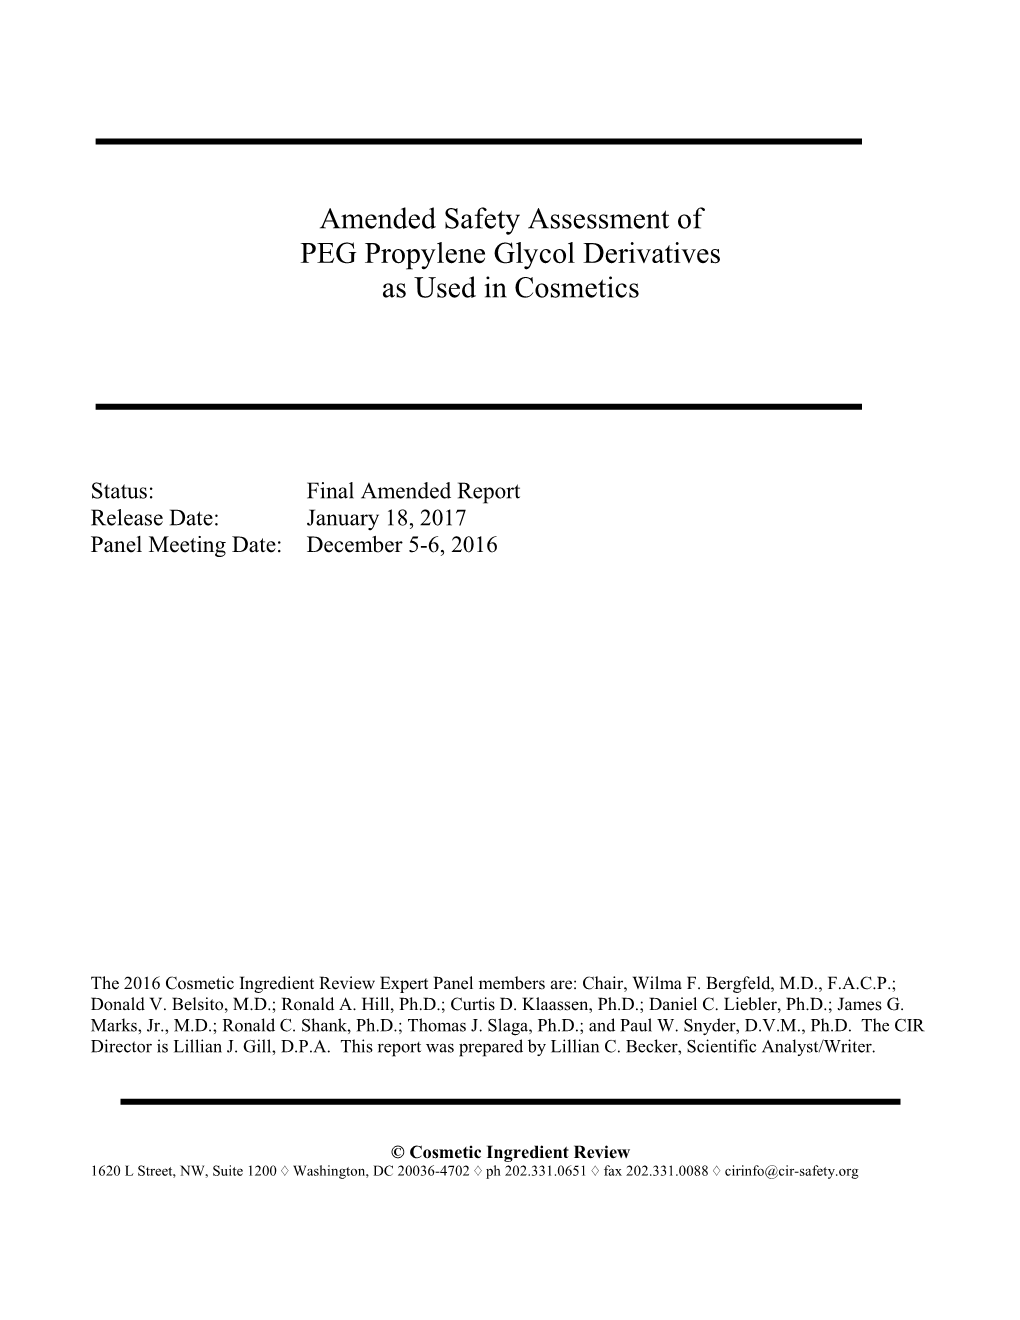 Amended Safety Assessment of PEG Propylene Glycol Derivatives As Used in Cosmetics